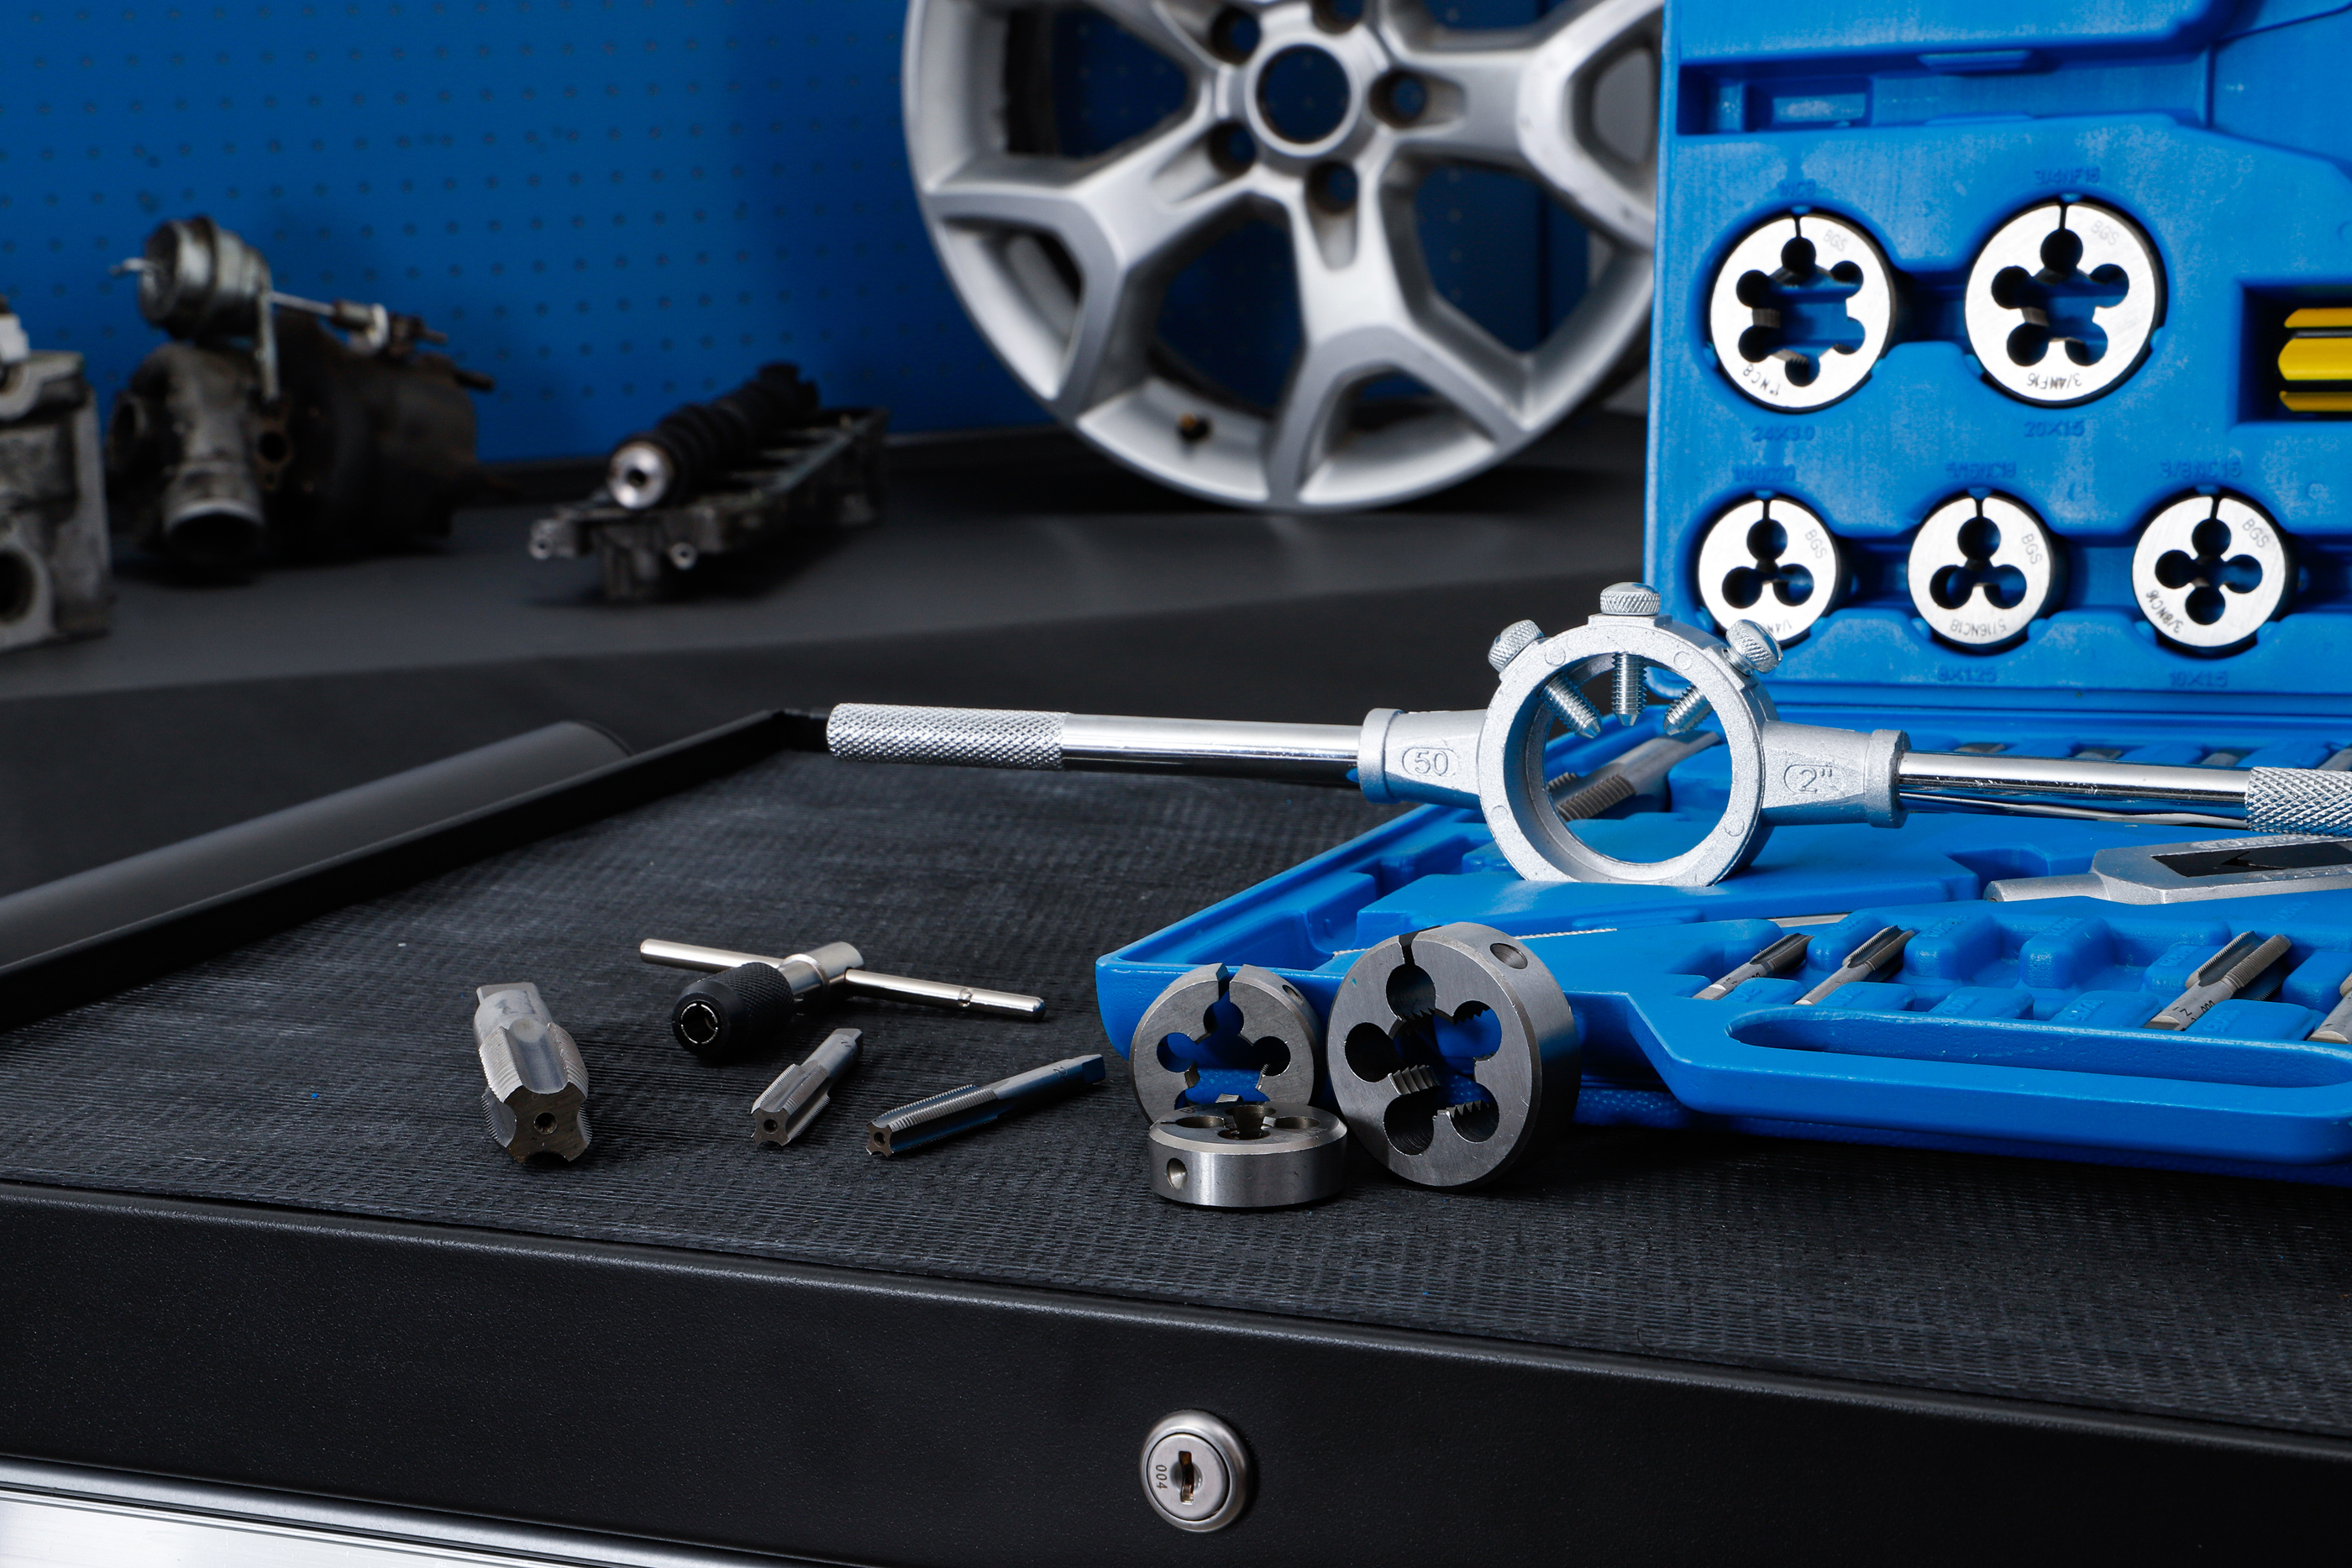 Tap and Die Set | Inch Sizes | 1/4